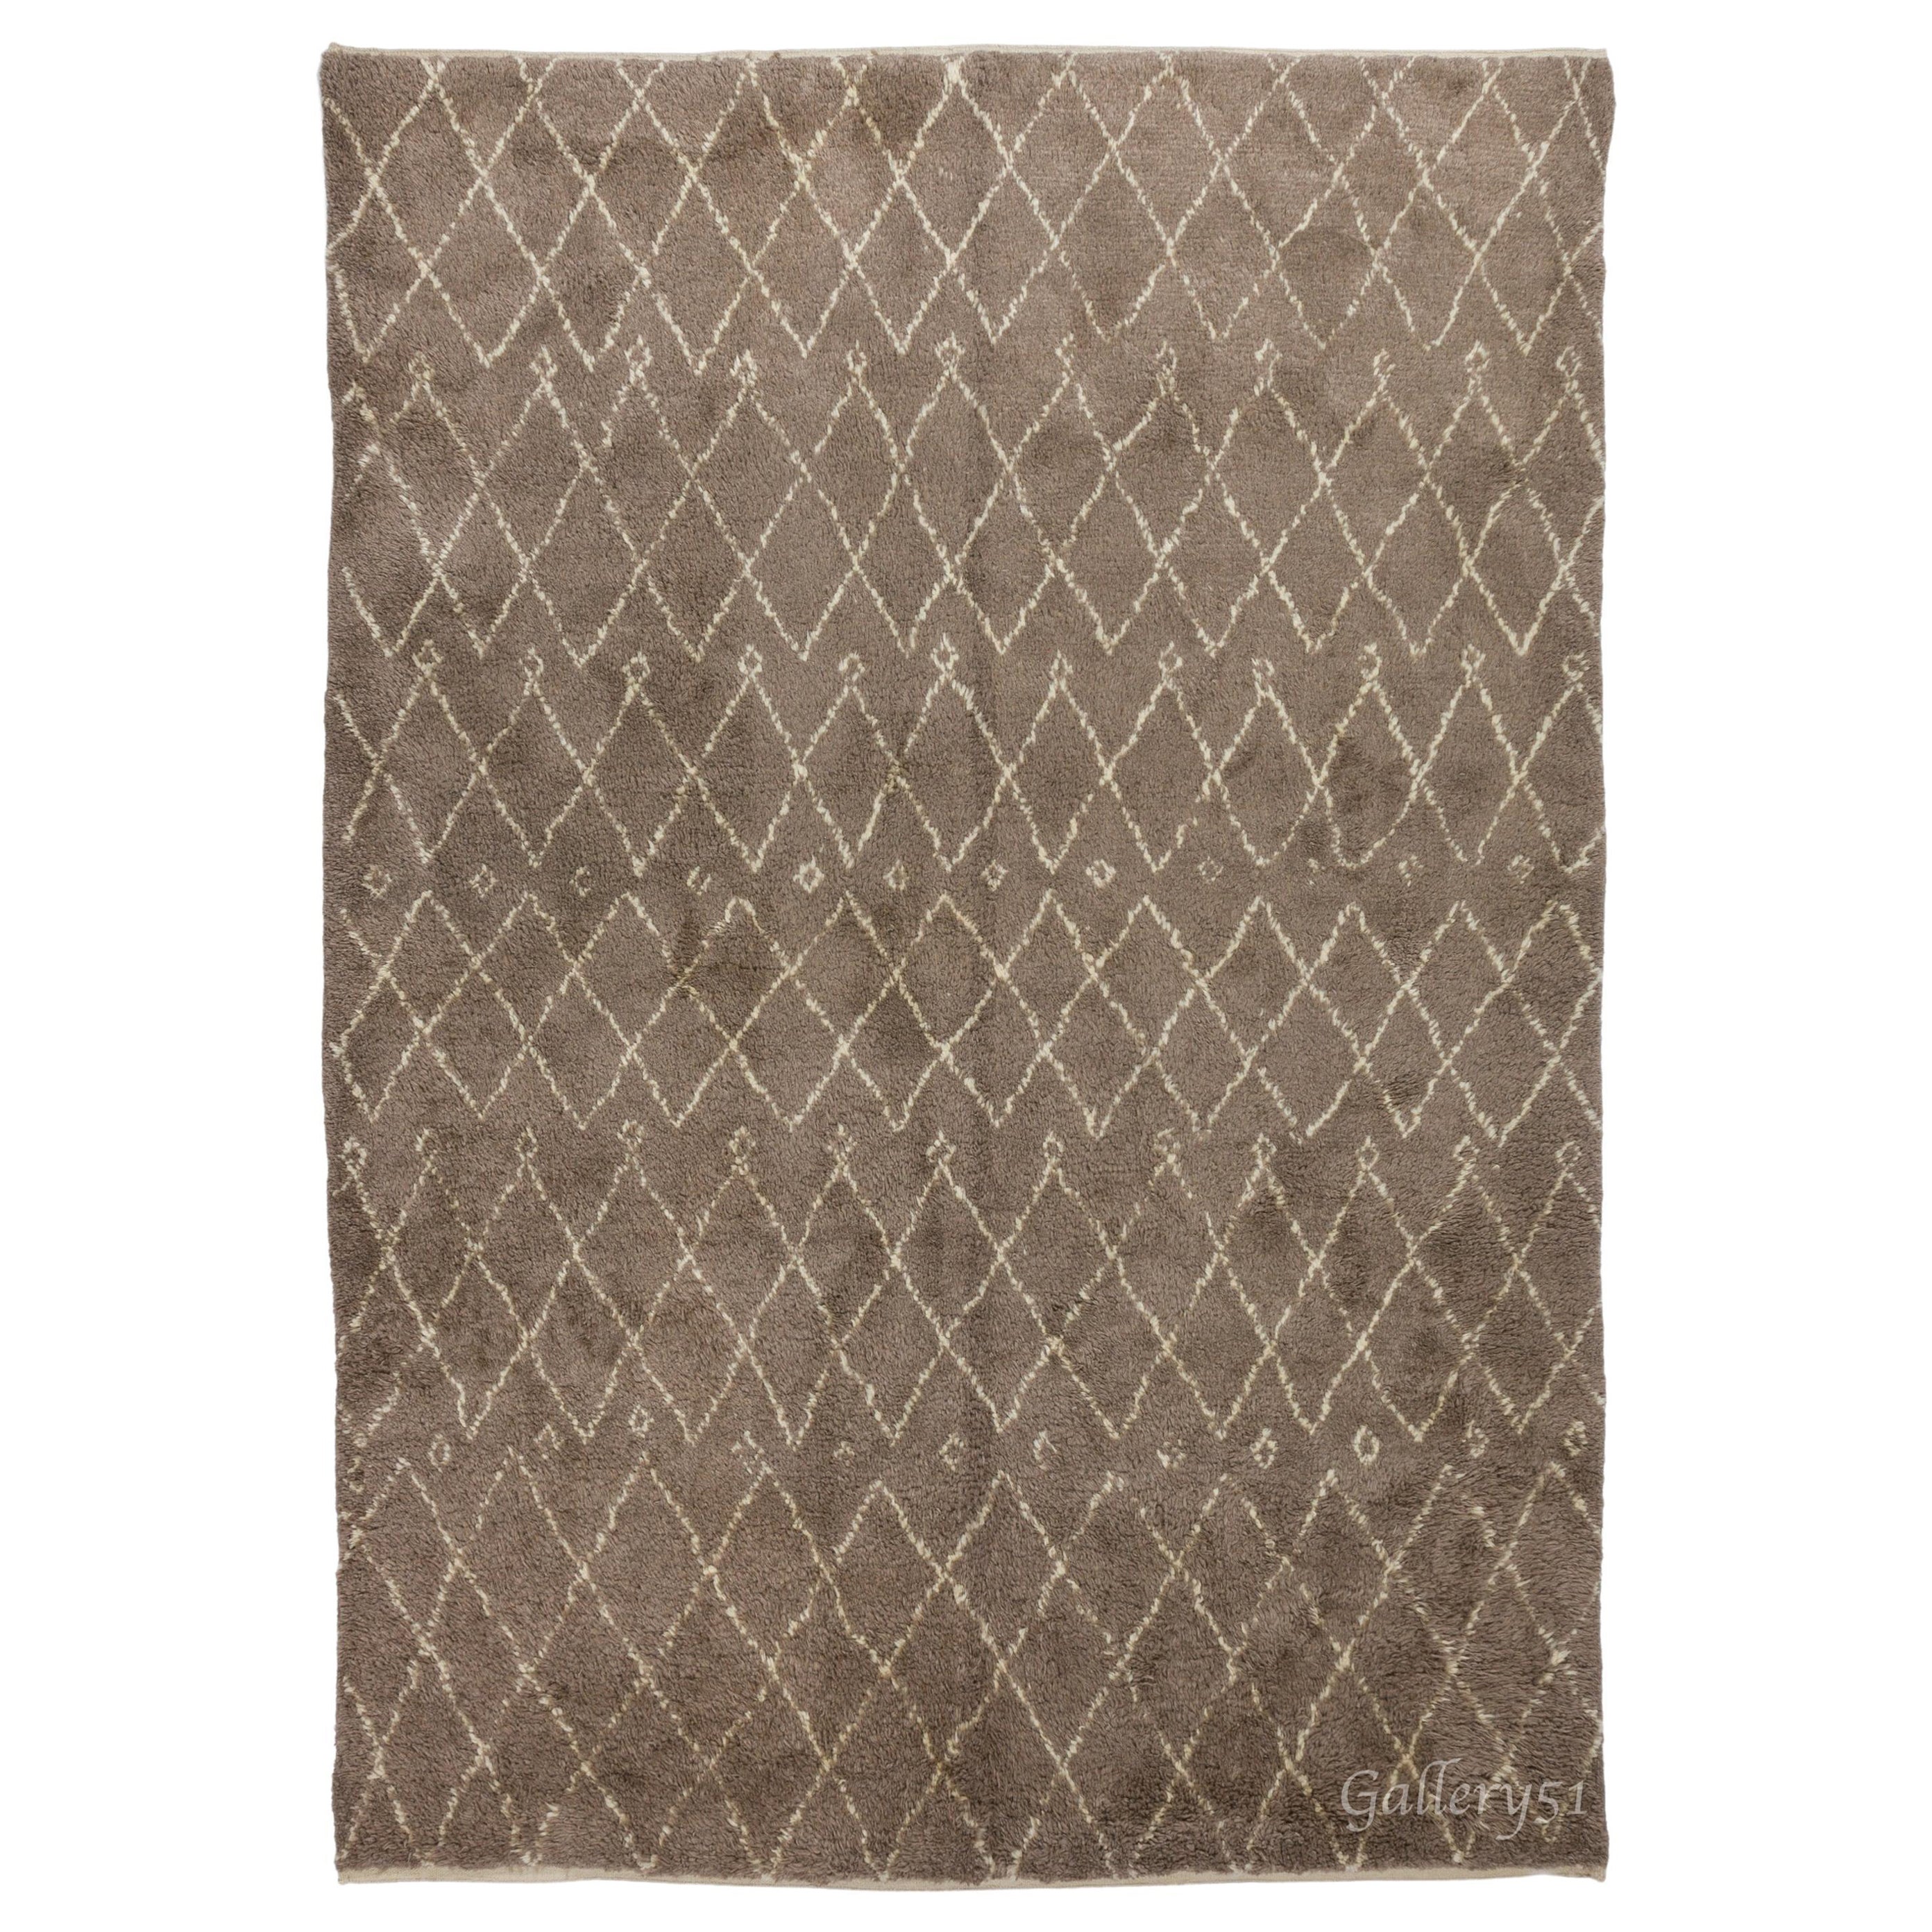 Contemporary Moroccan Berber Rug in Natural Latte and Ivory Colors, 100% Wool For Sale